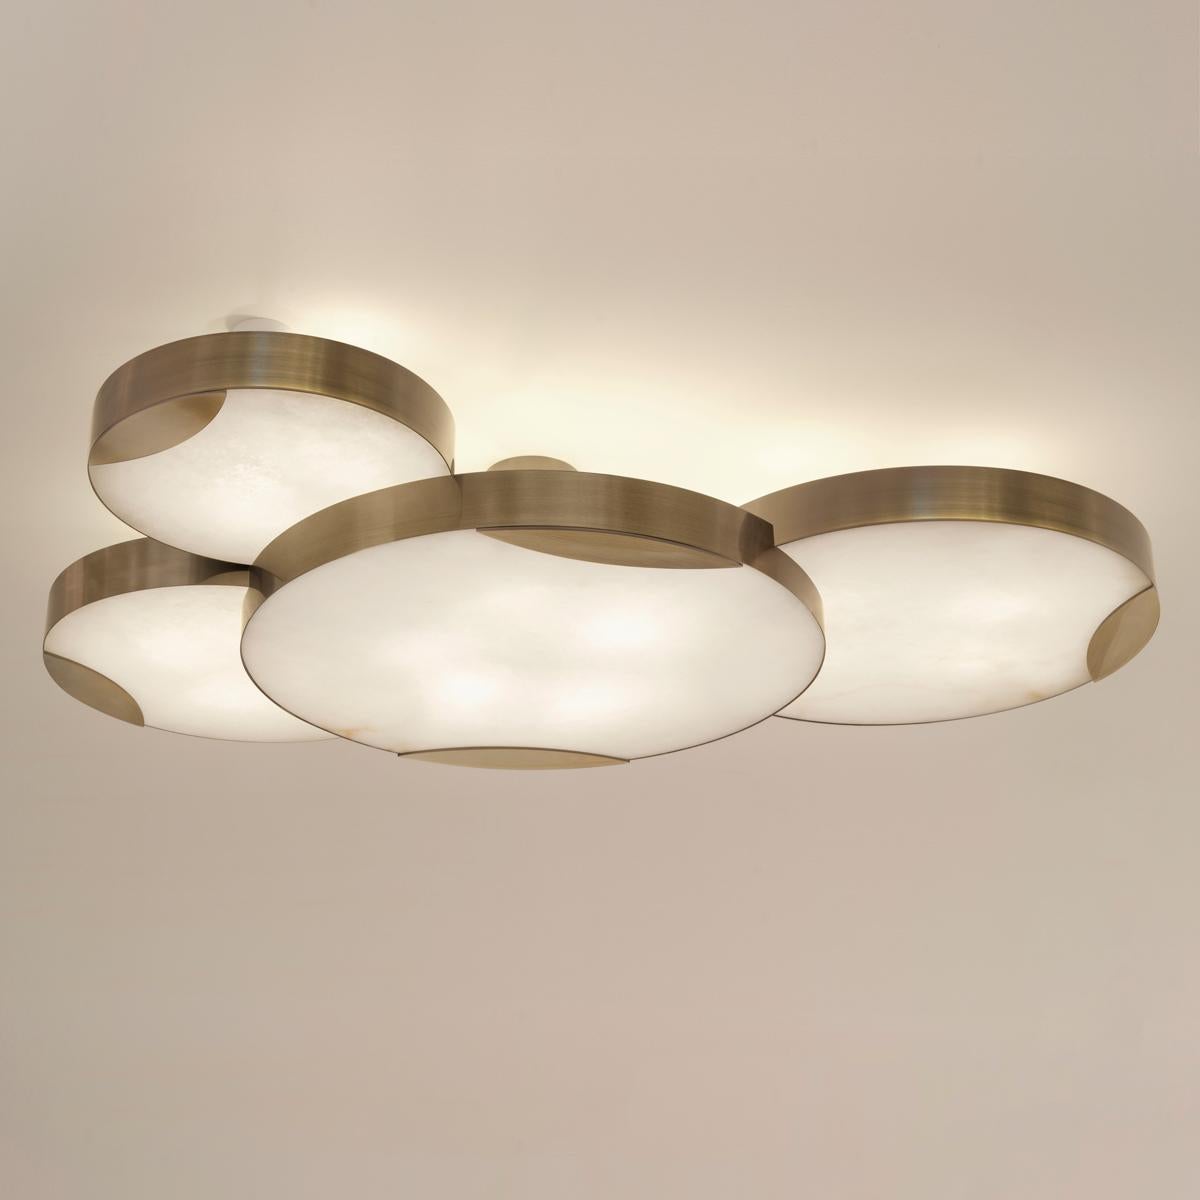 Cloud N.4 Ceiling Light by Gaspare Asaro-Satin Brass Finish For Sale 3